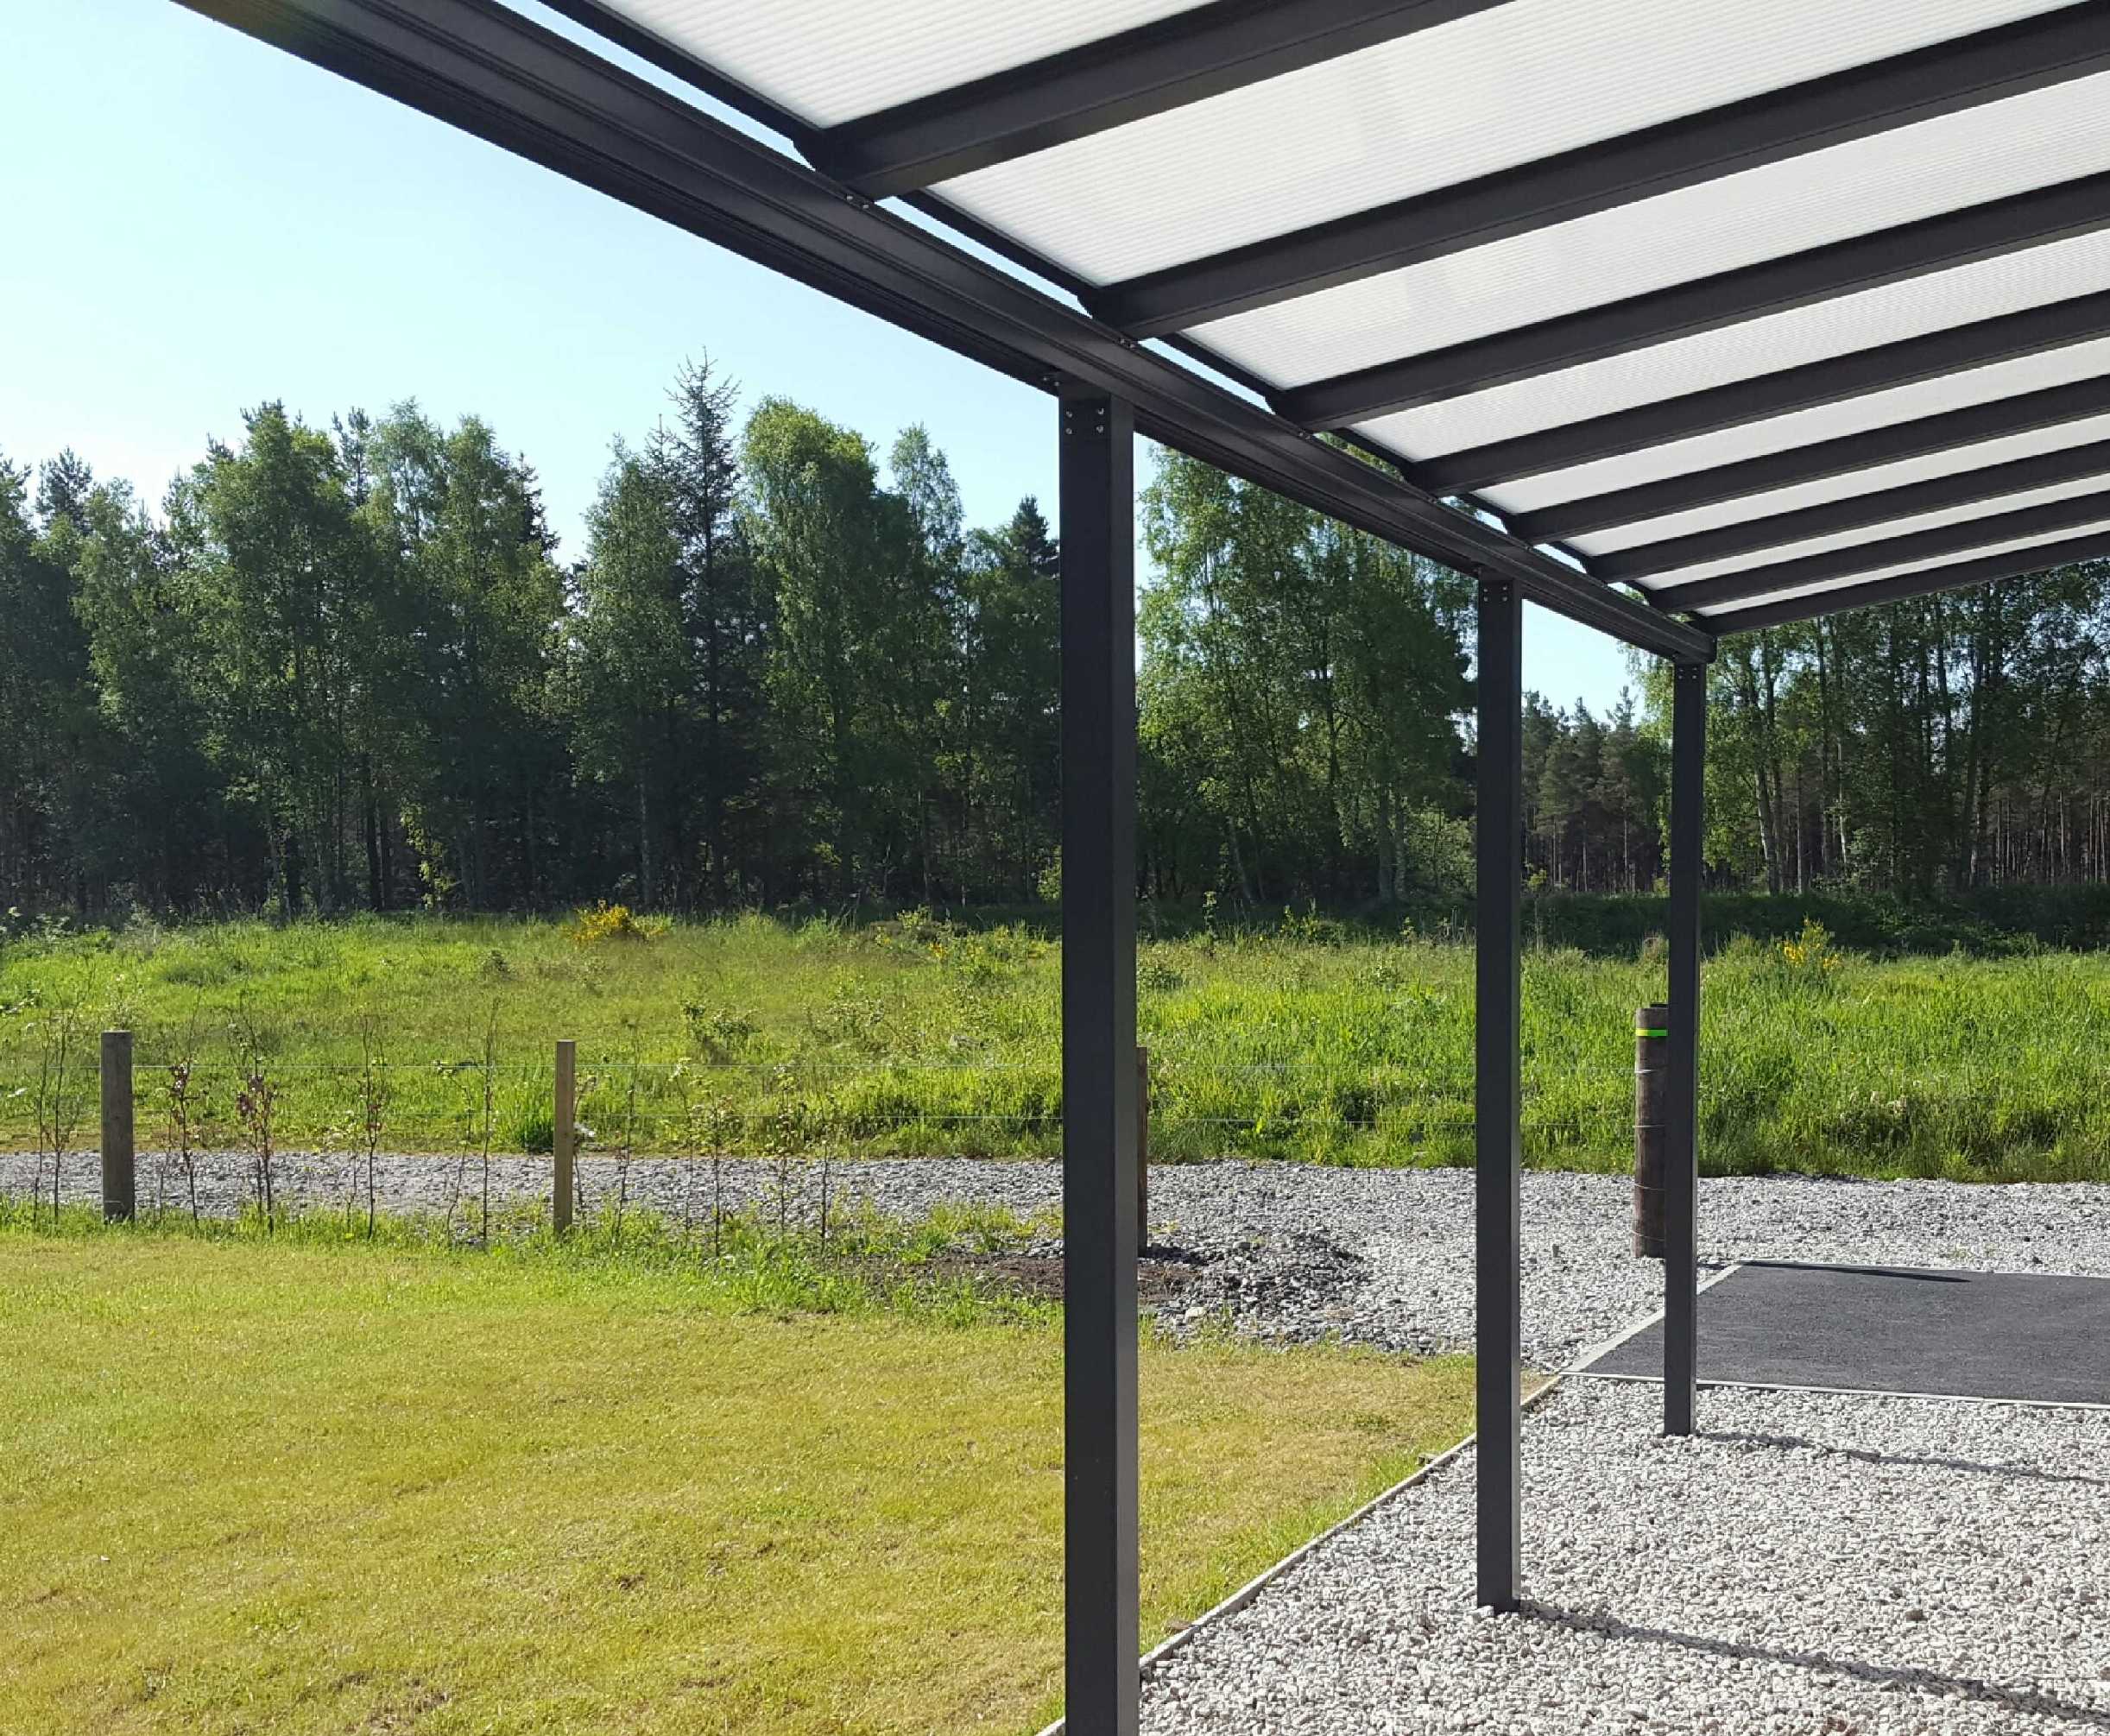 Omega Smart Lean-To Canopy, Anthracite Grey, 6mm Glass Clear Plate Polycarbonate Glazing - 9.8m (W) x 2.5m (P), (5) Supporting Posts